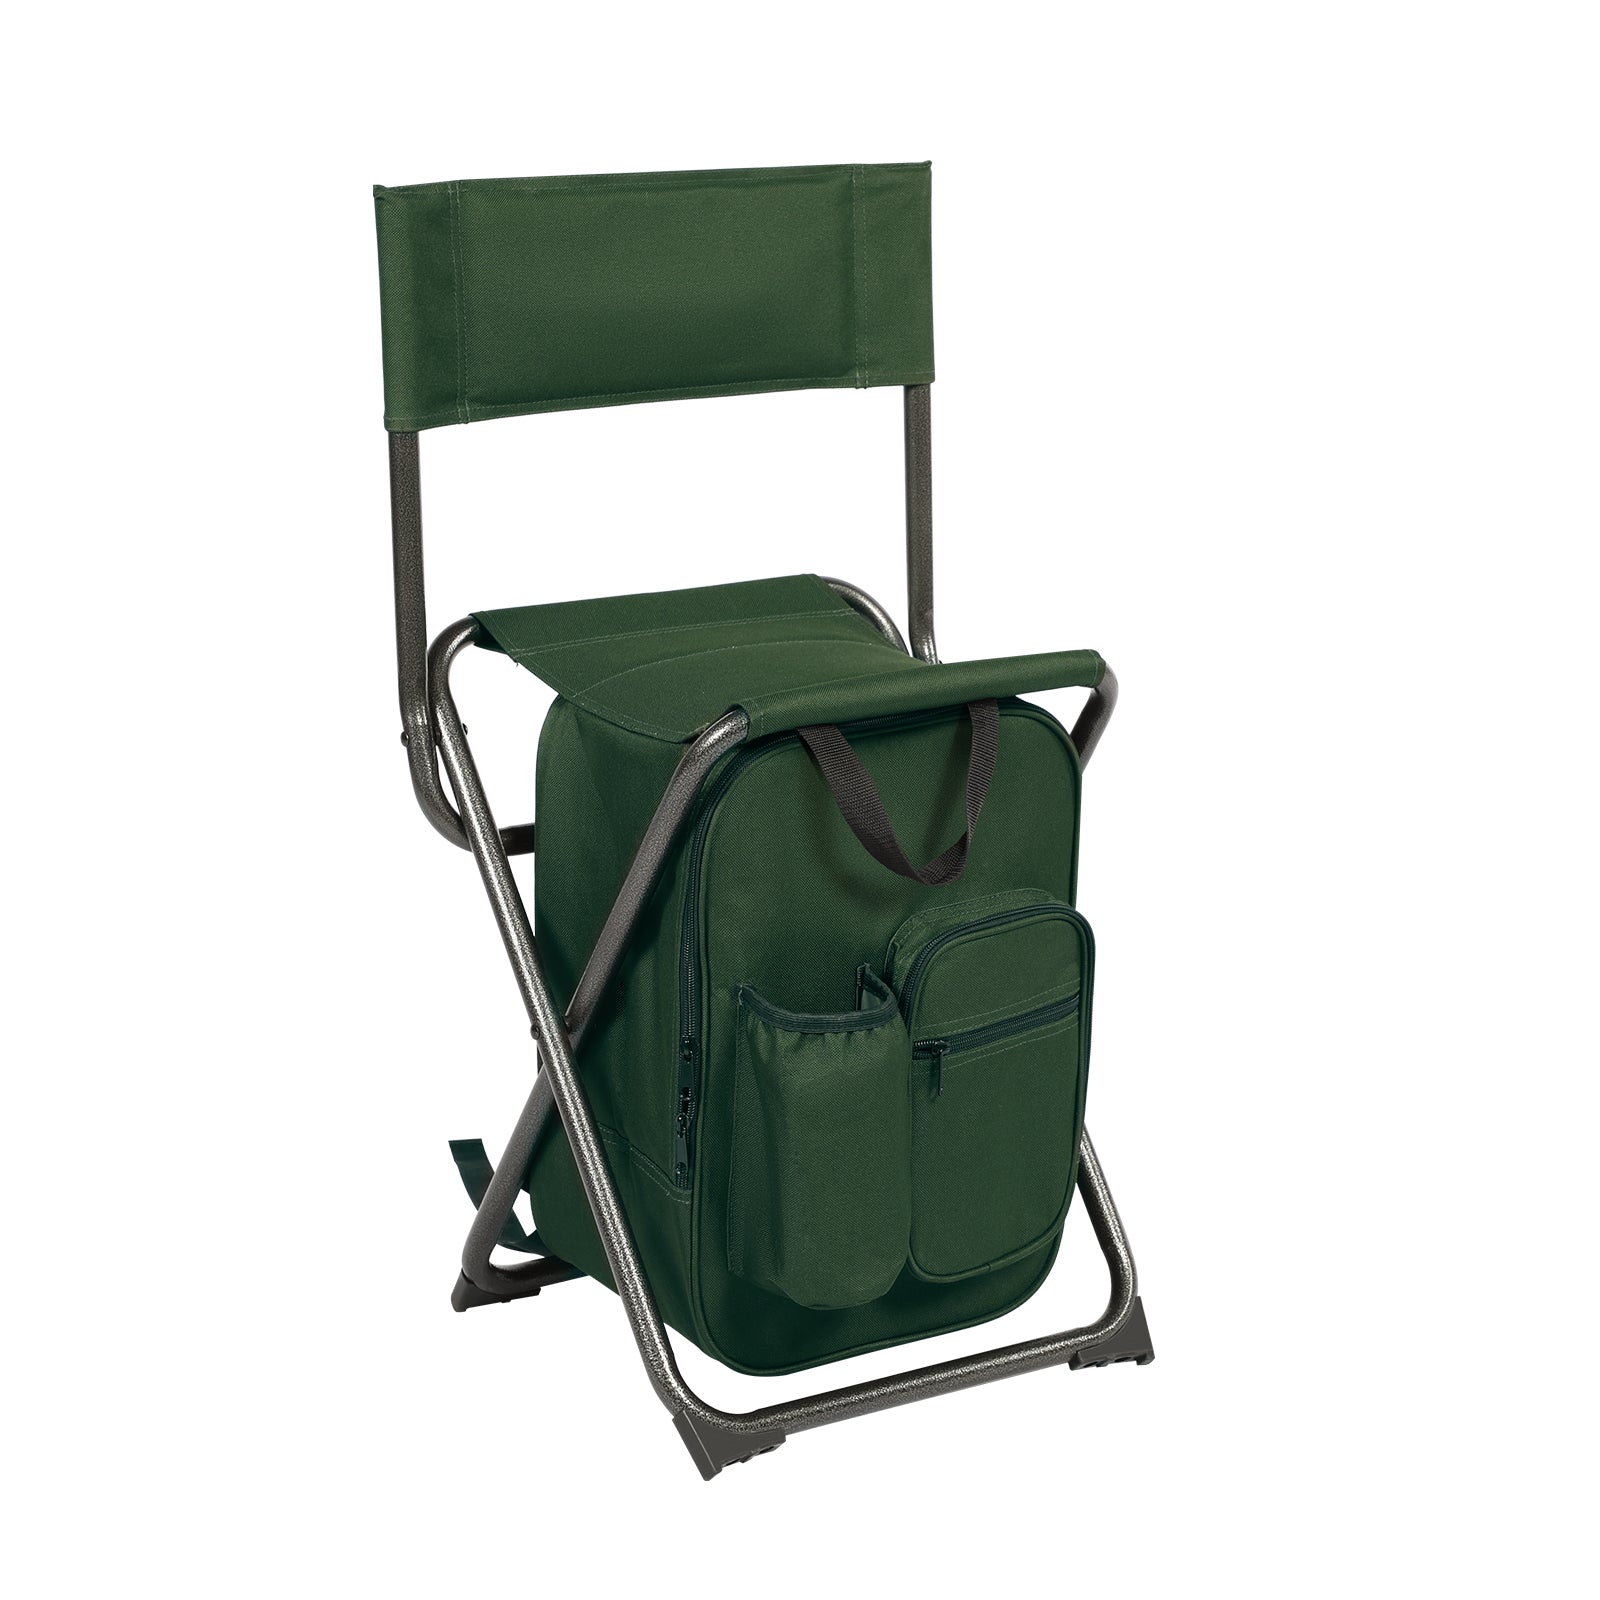 Steel Folding Camping Chair Fishing Stool Backpack Portable for